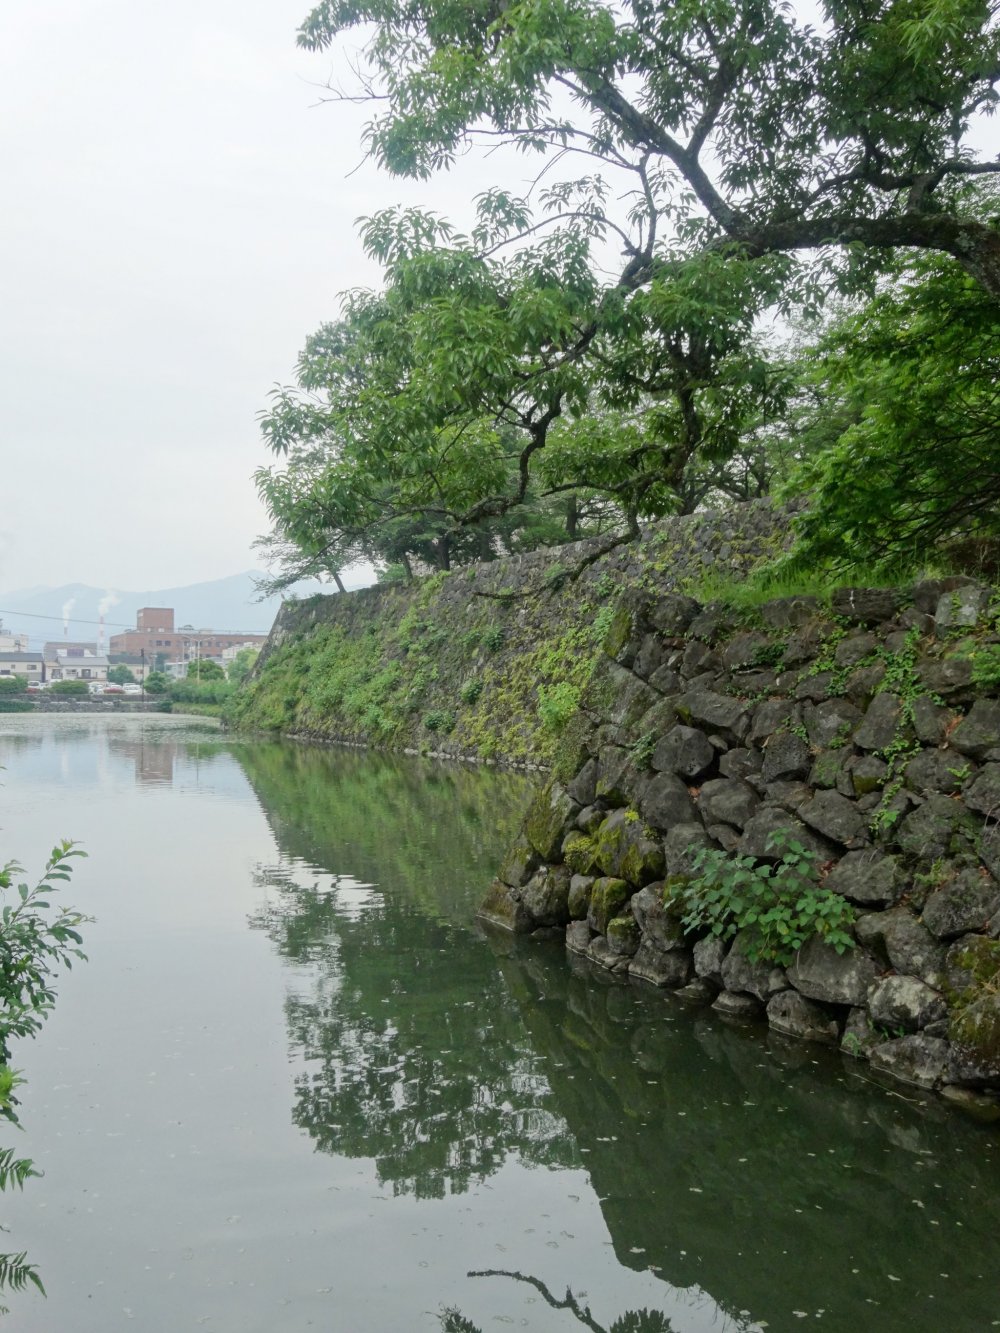 The moat that once encircled the castle is also still intact